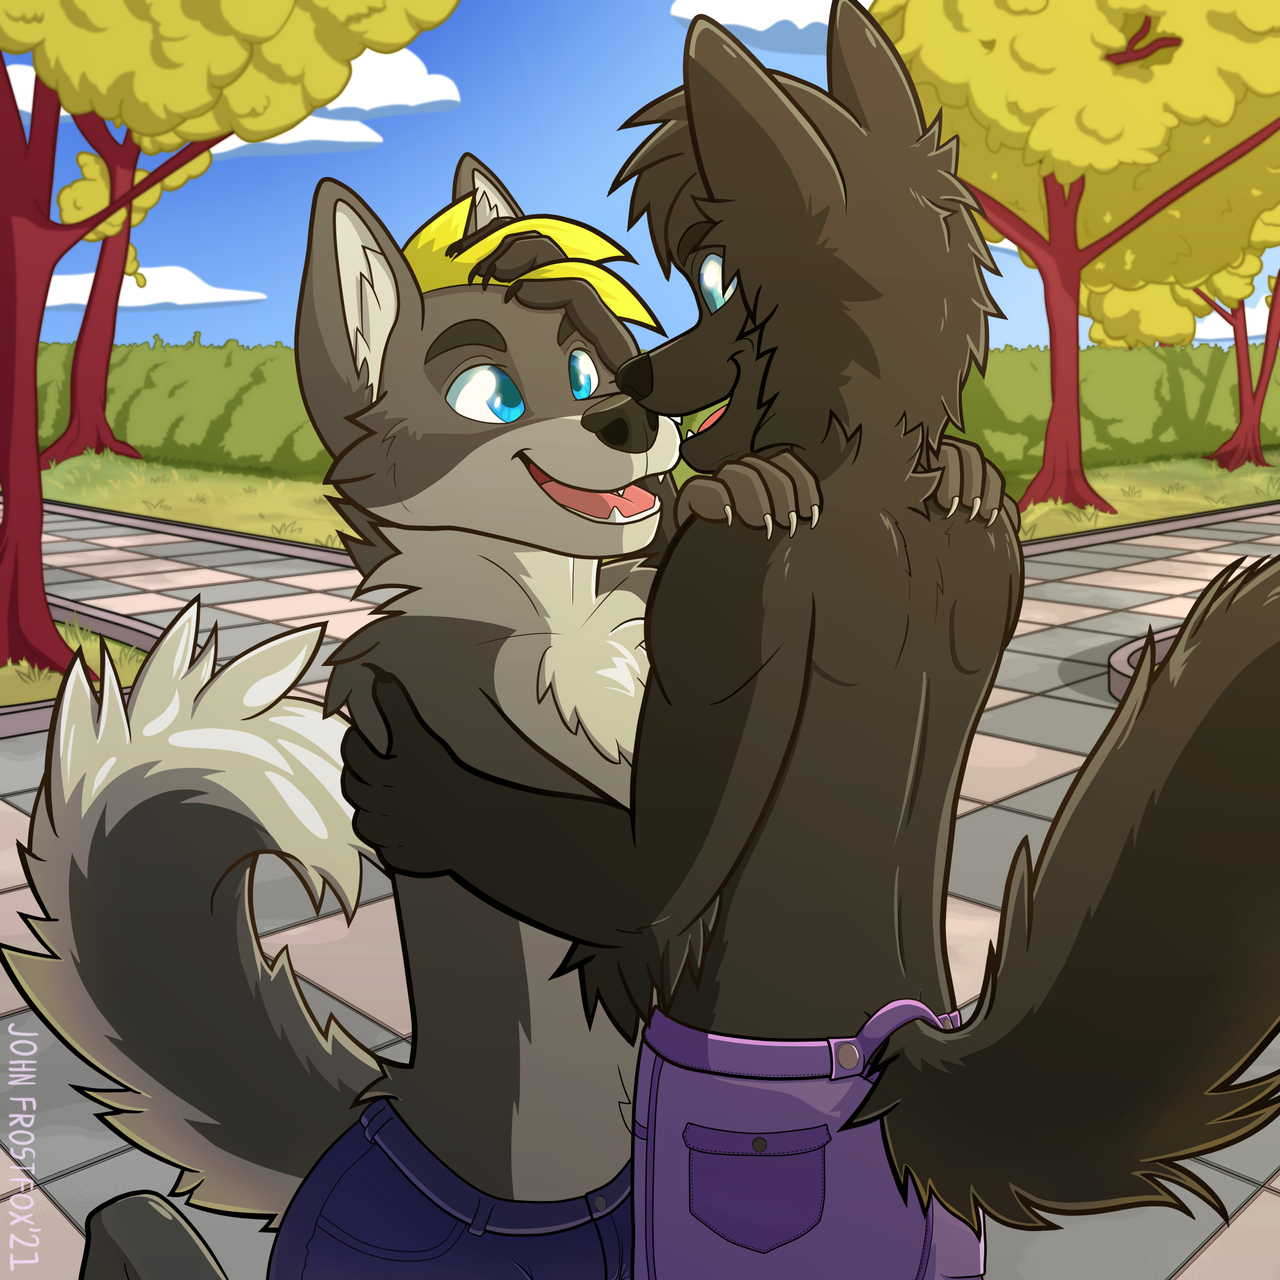 [CM] A couple in the park